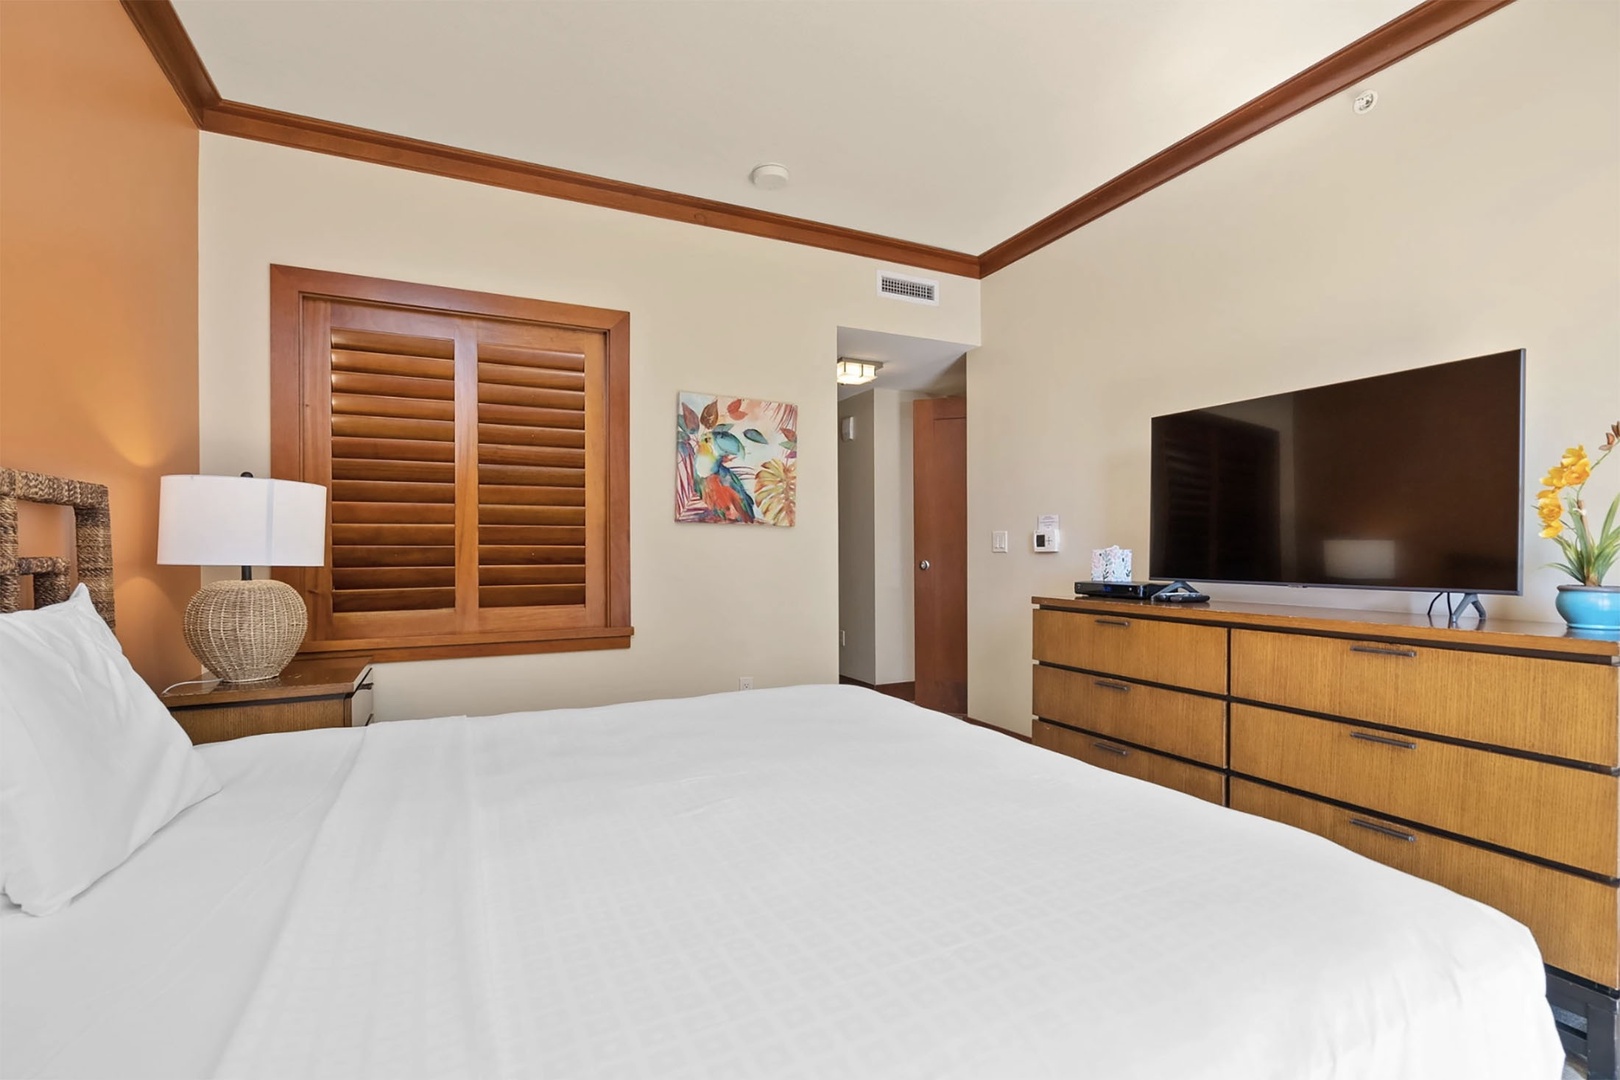 Primary bedroom features a king bed, balcony, ensuite bathroom, and TV